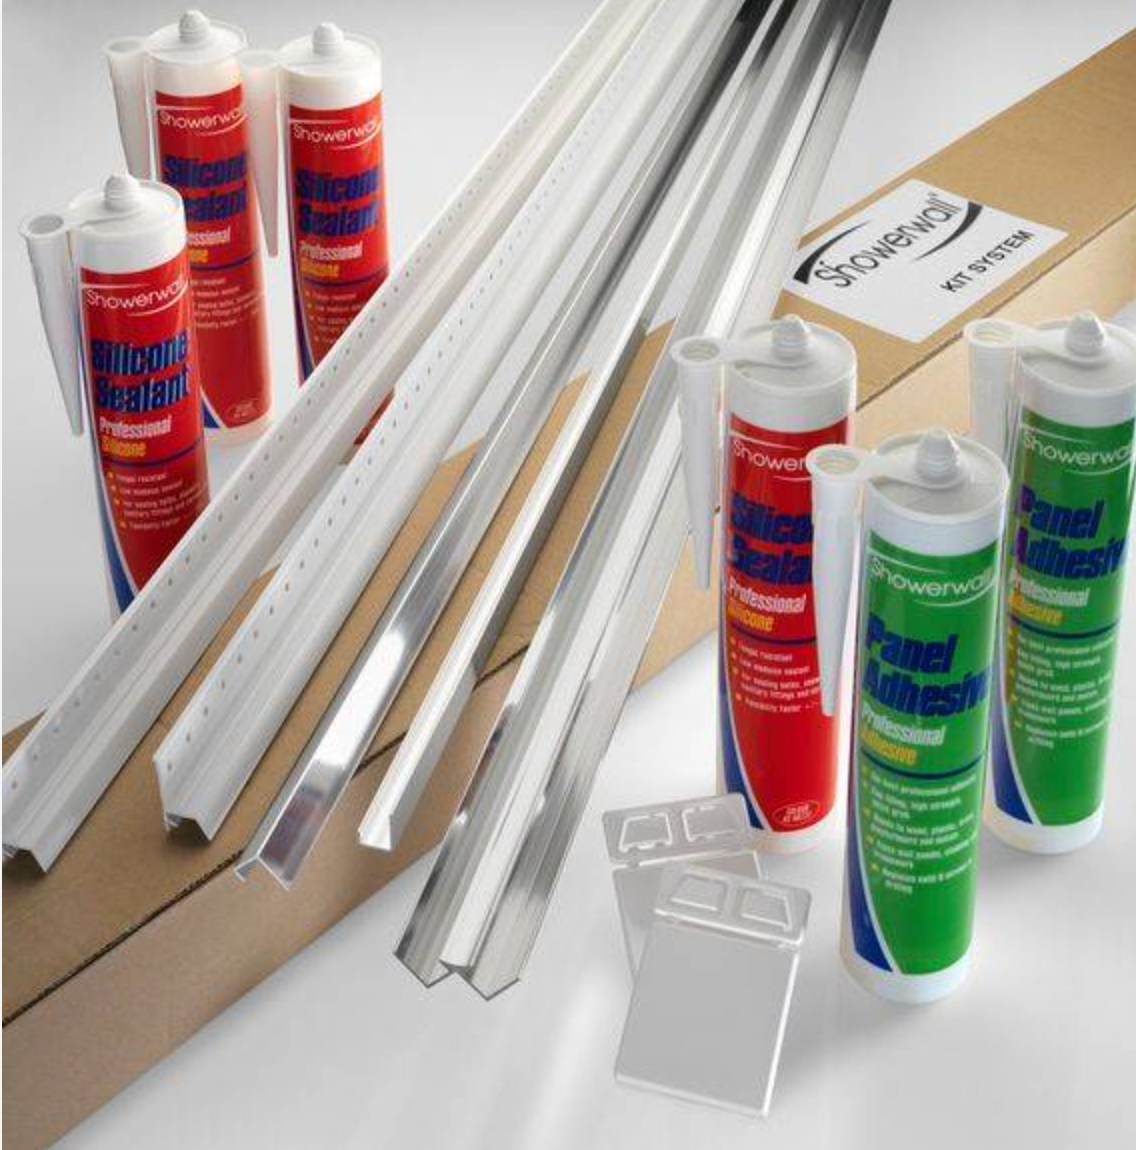 Showerwall Laminate Installation Kit - Satin Silver trim with clear or White sealant